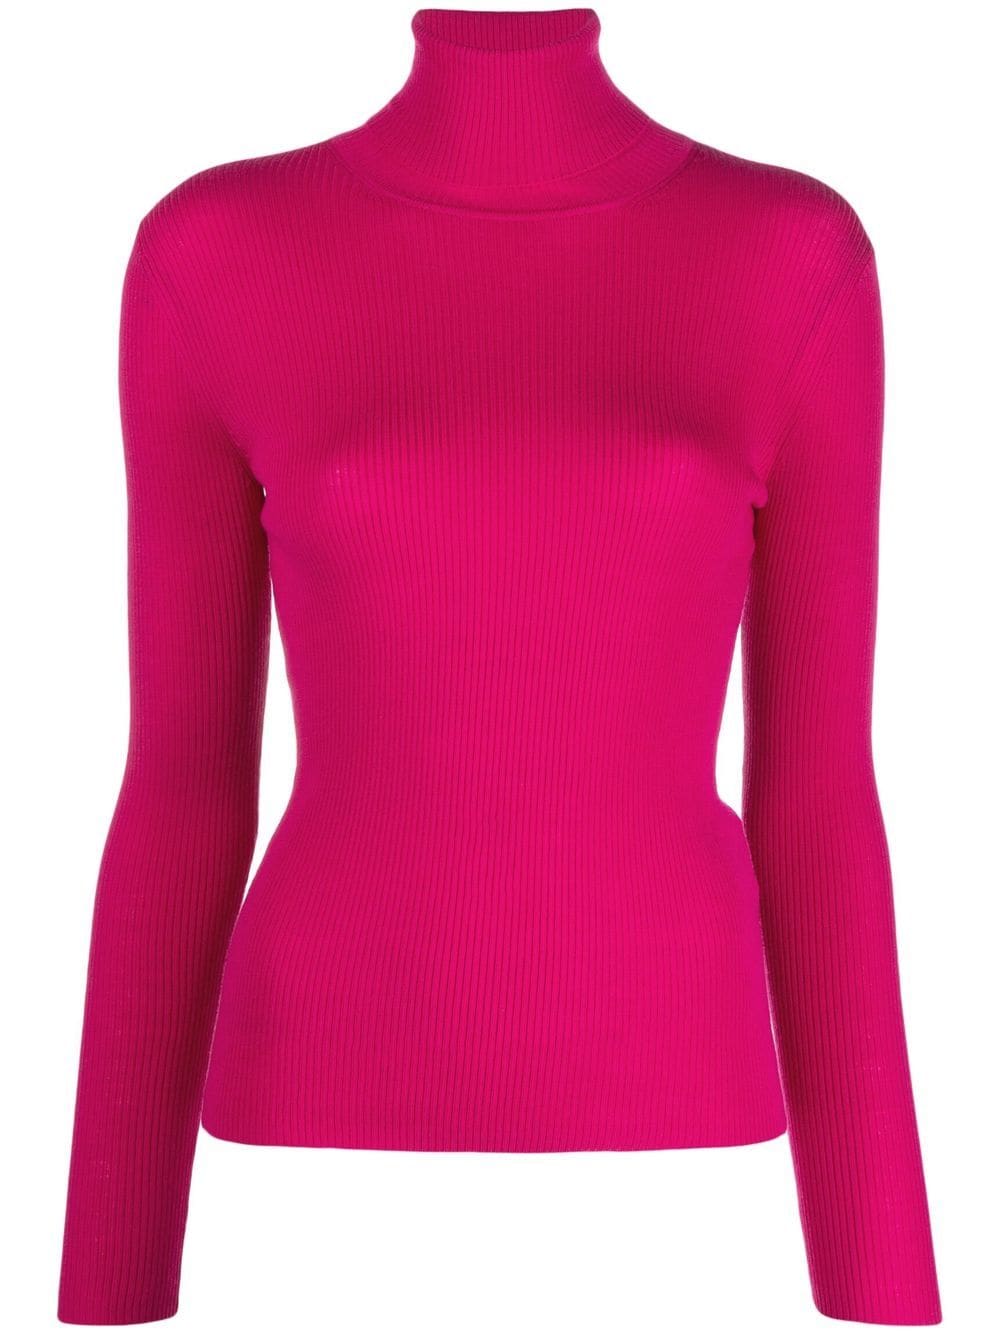 P.A.R.O.S.H. ribbed-knit roll-neck jumper - Pink von P.A.R.O.S.H.